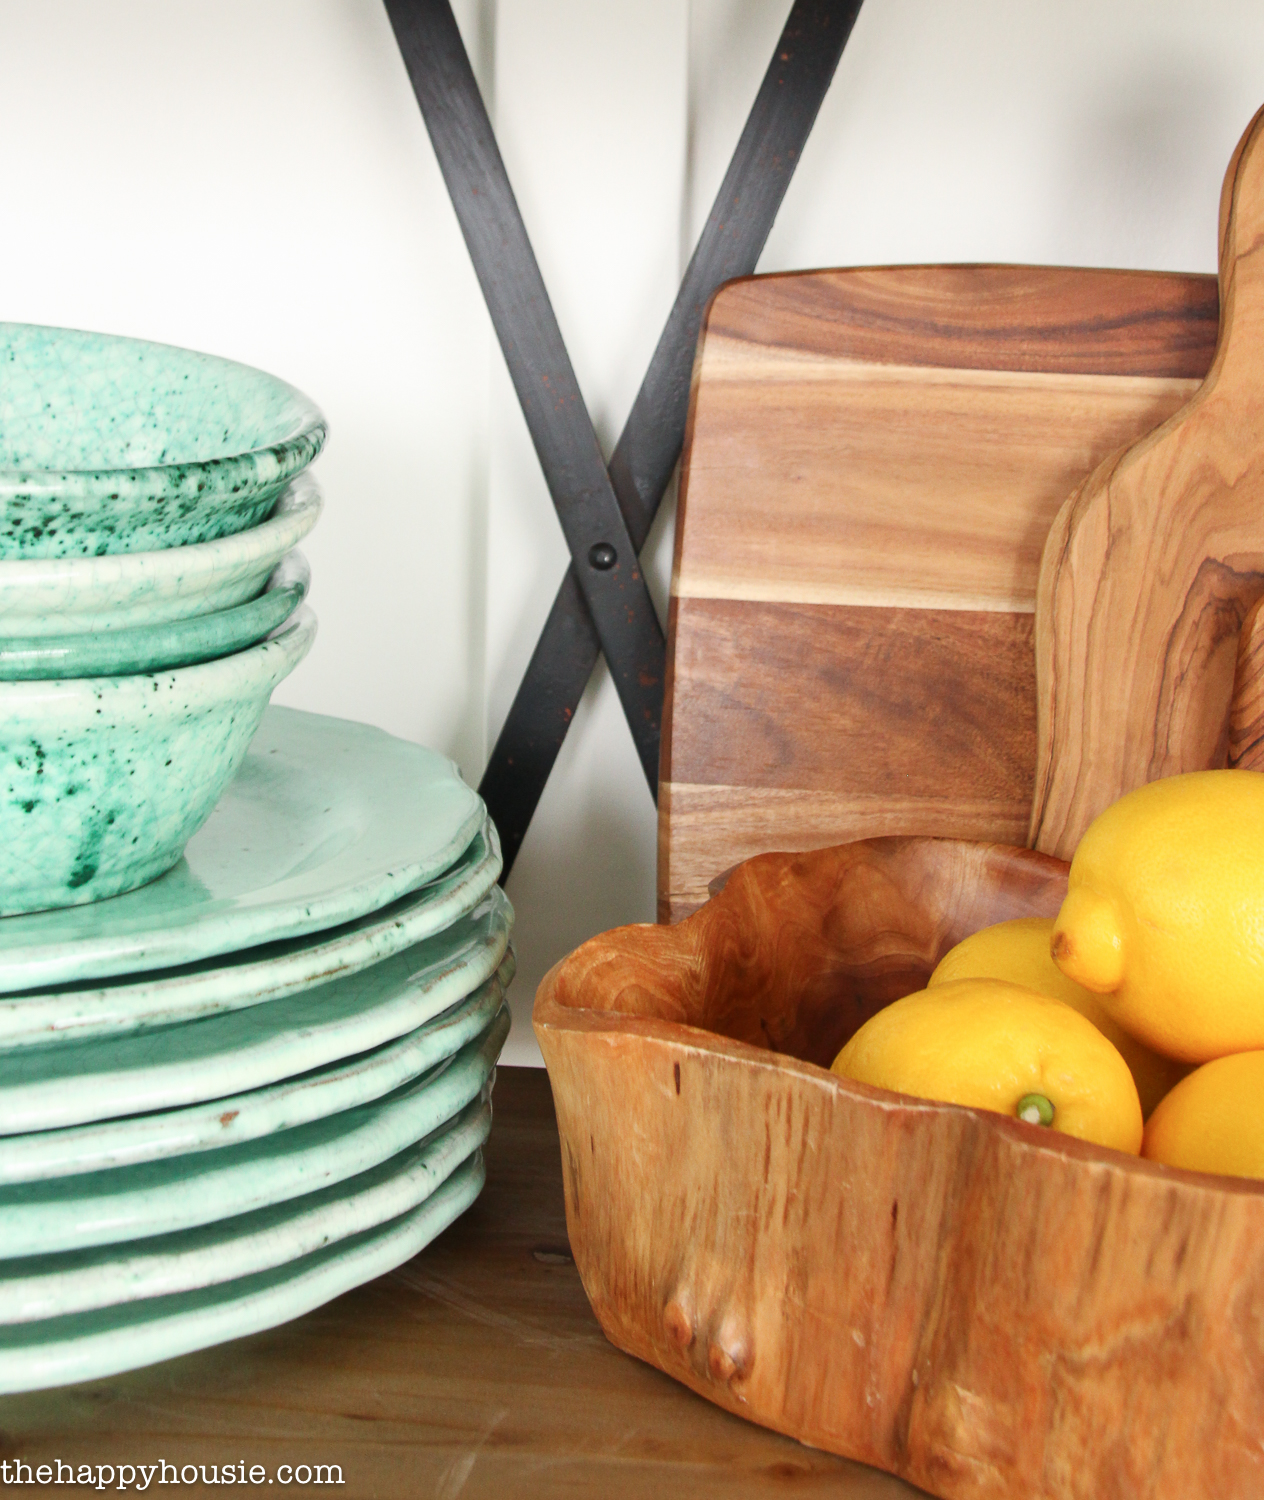 Soft green dishes are on the open shelving unit beside the lemons.